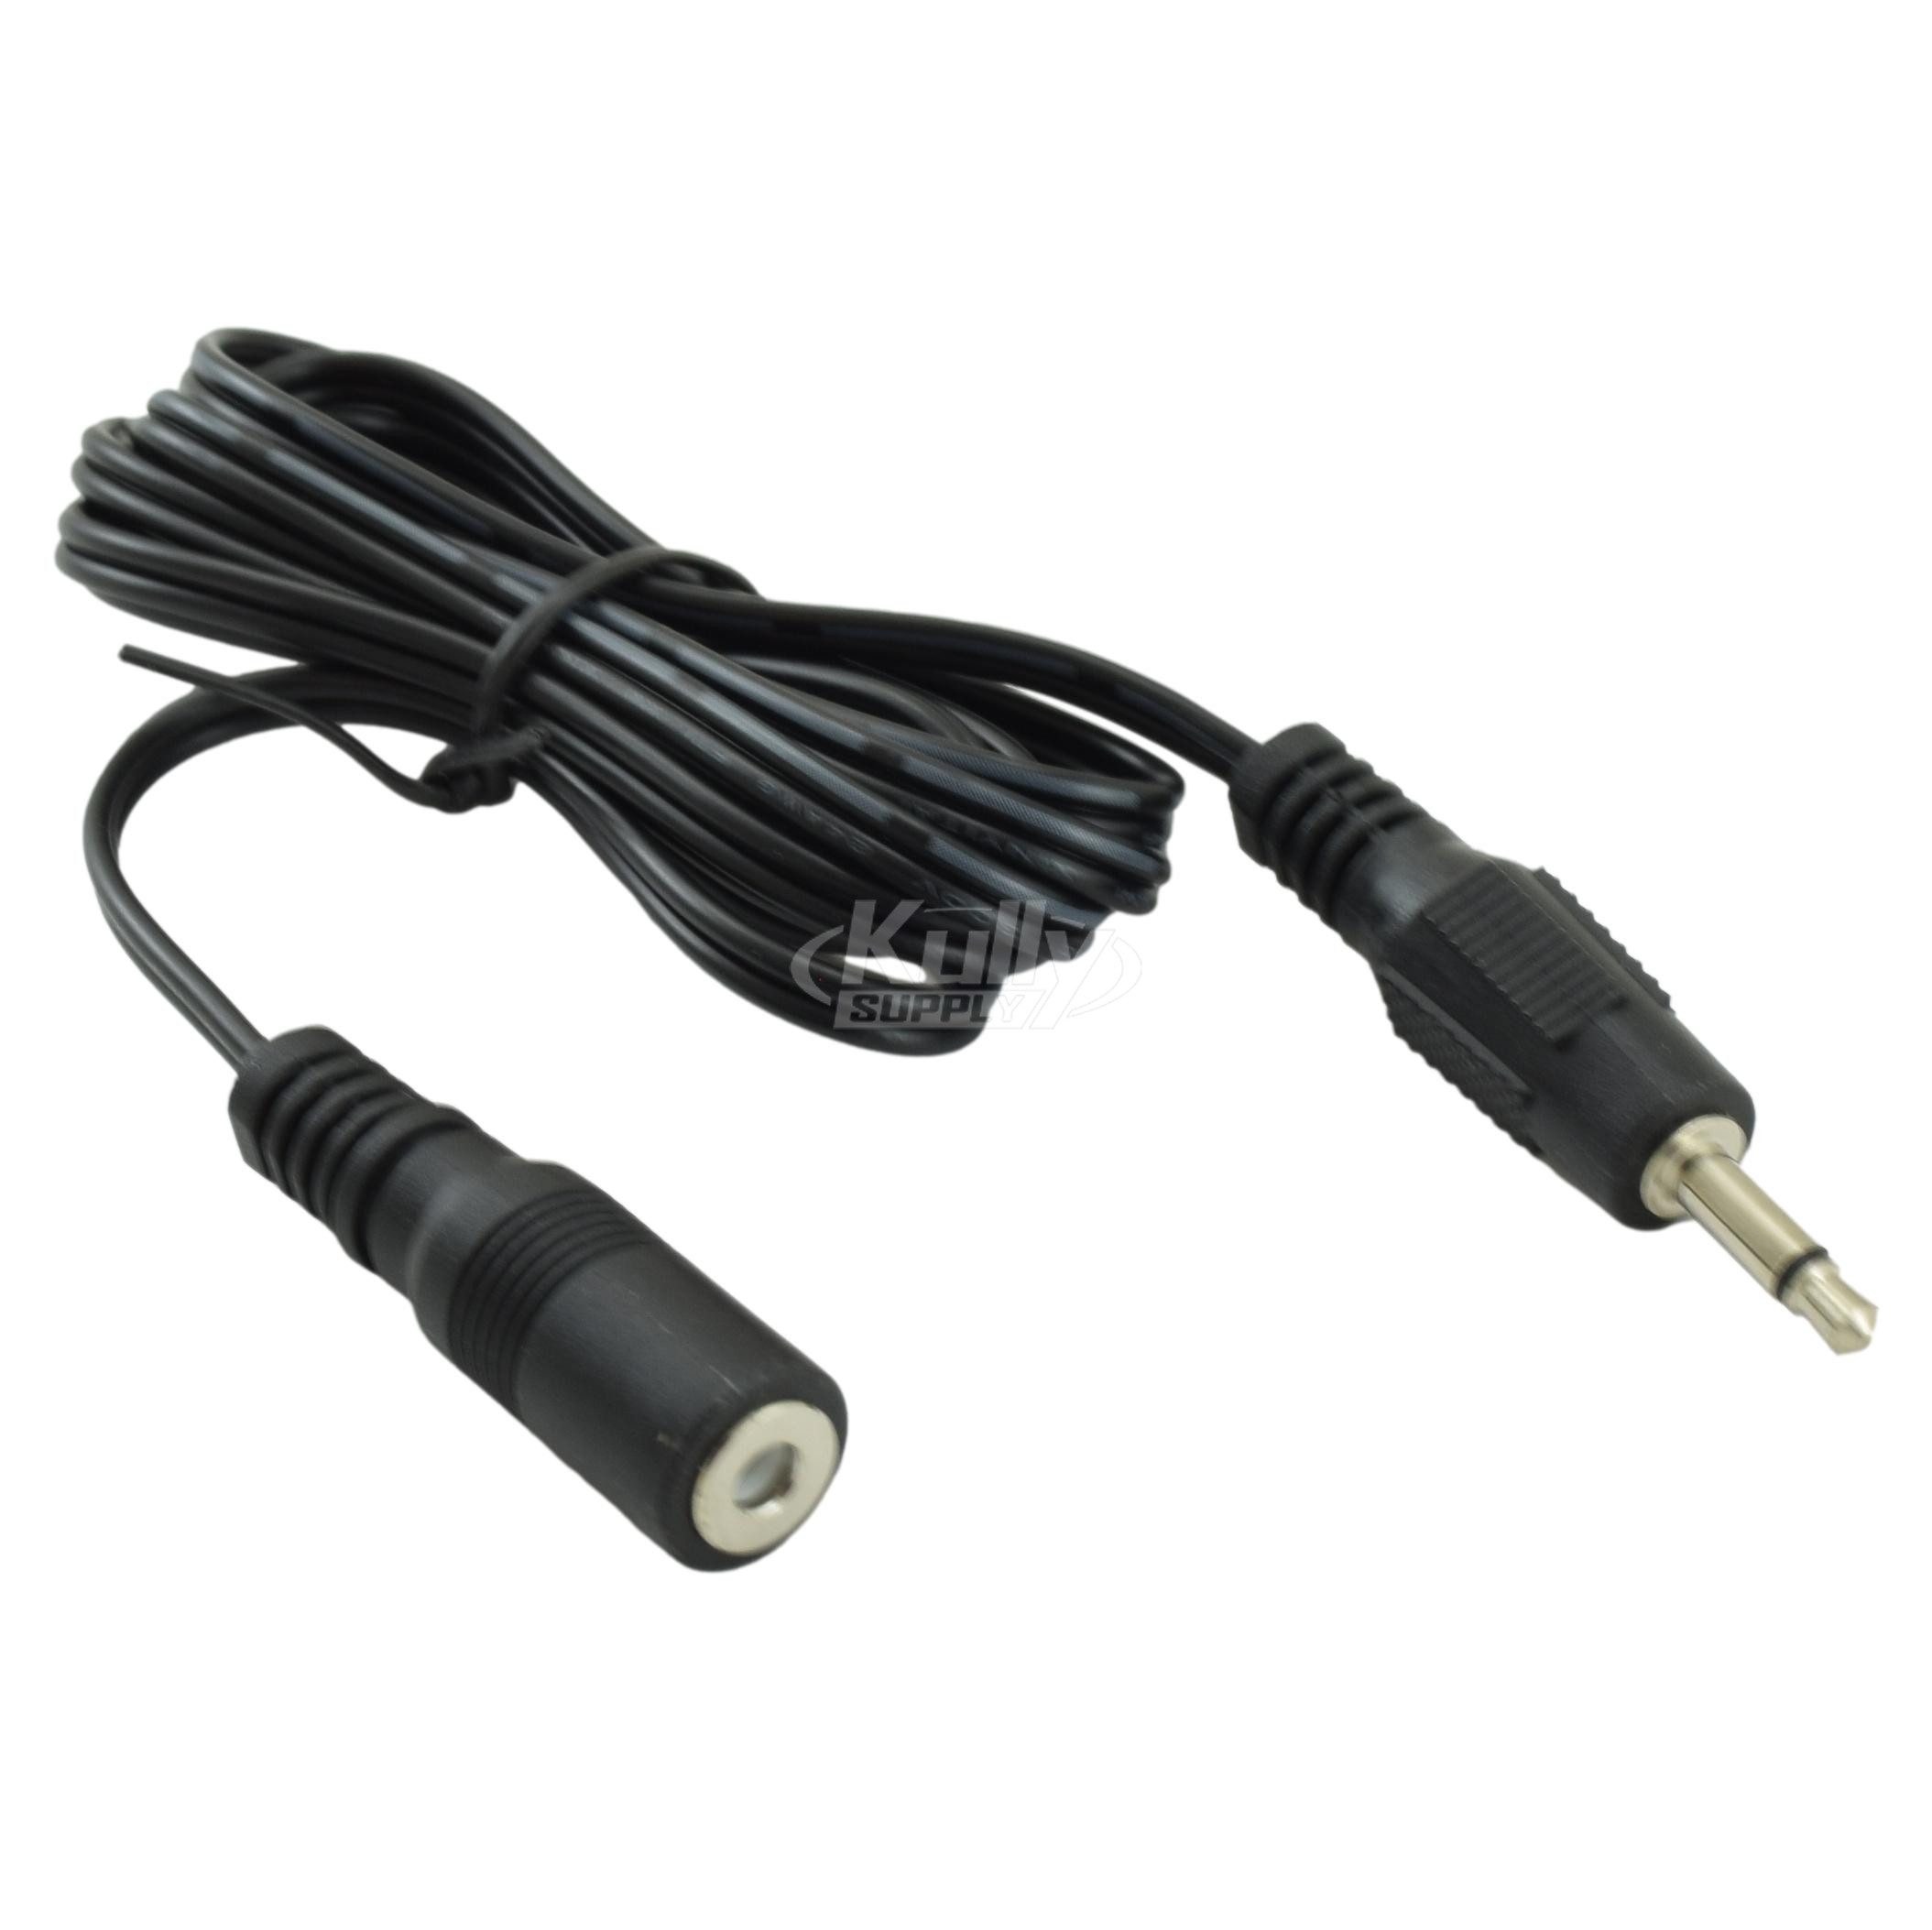 Sloan SFP-37 Extension Cable